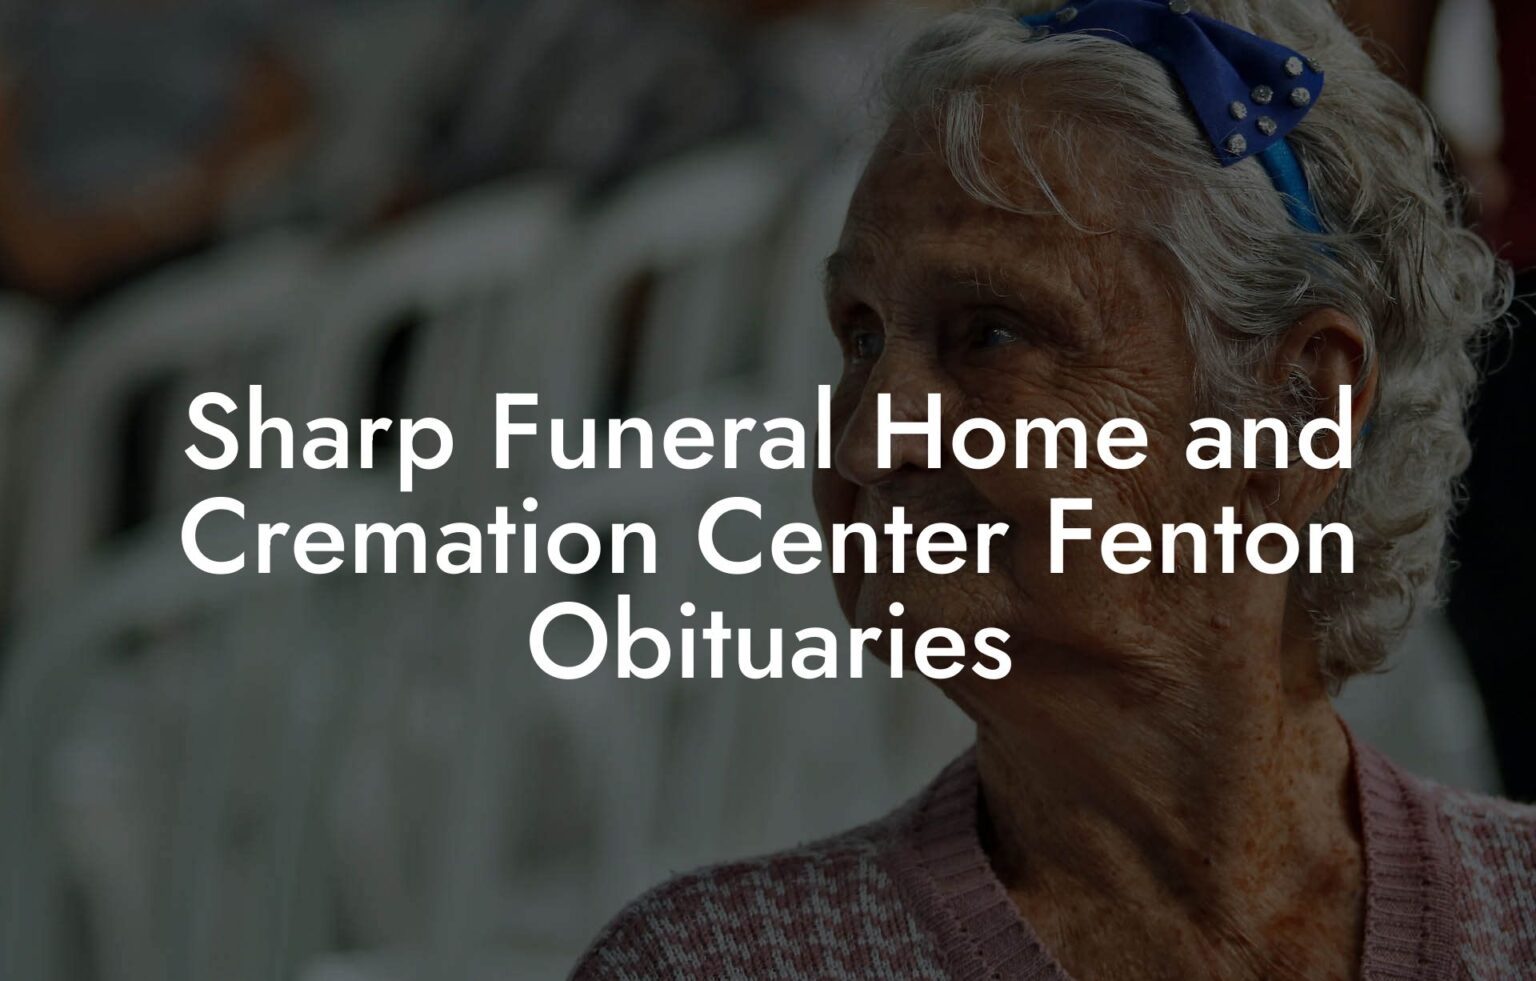 Sharp Funeral Home and Cremation Center Fenton Obituaries - Eulogy ...